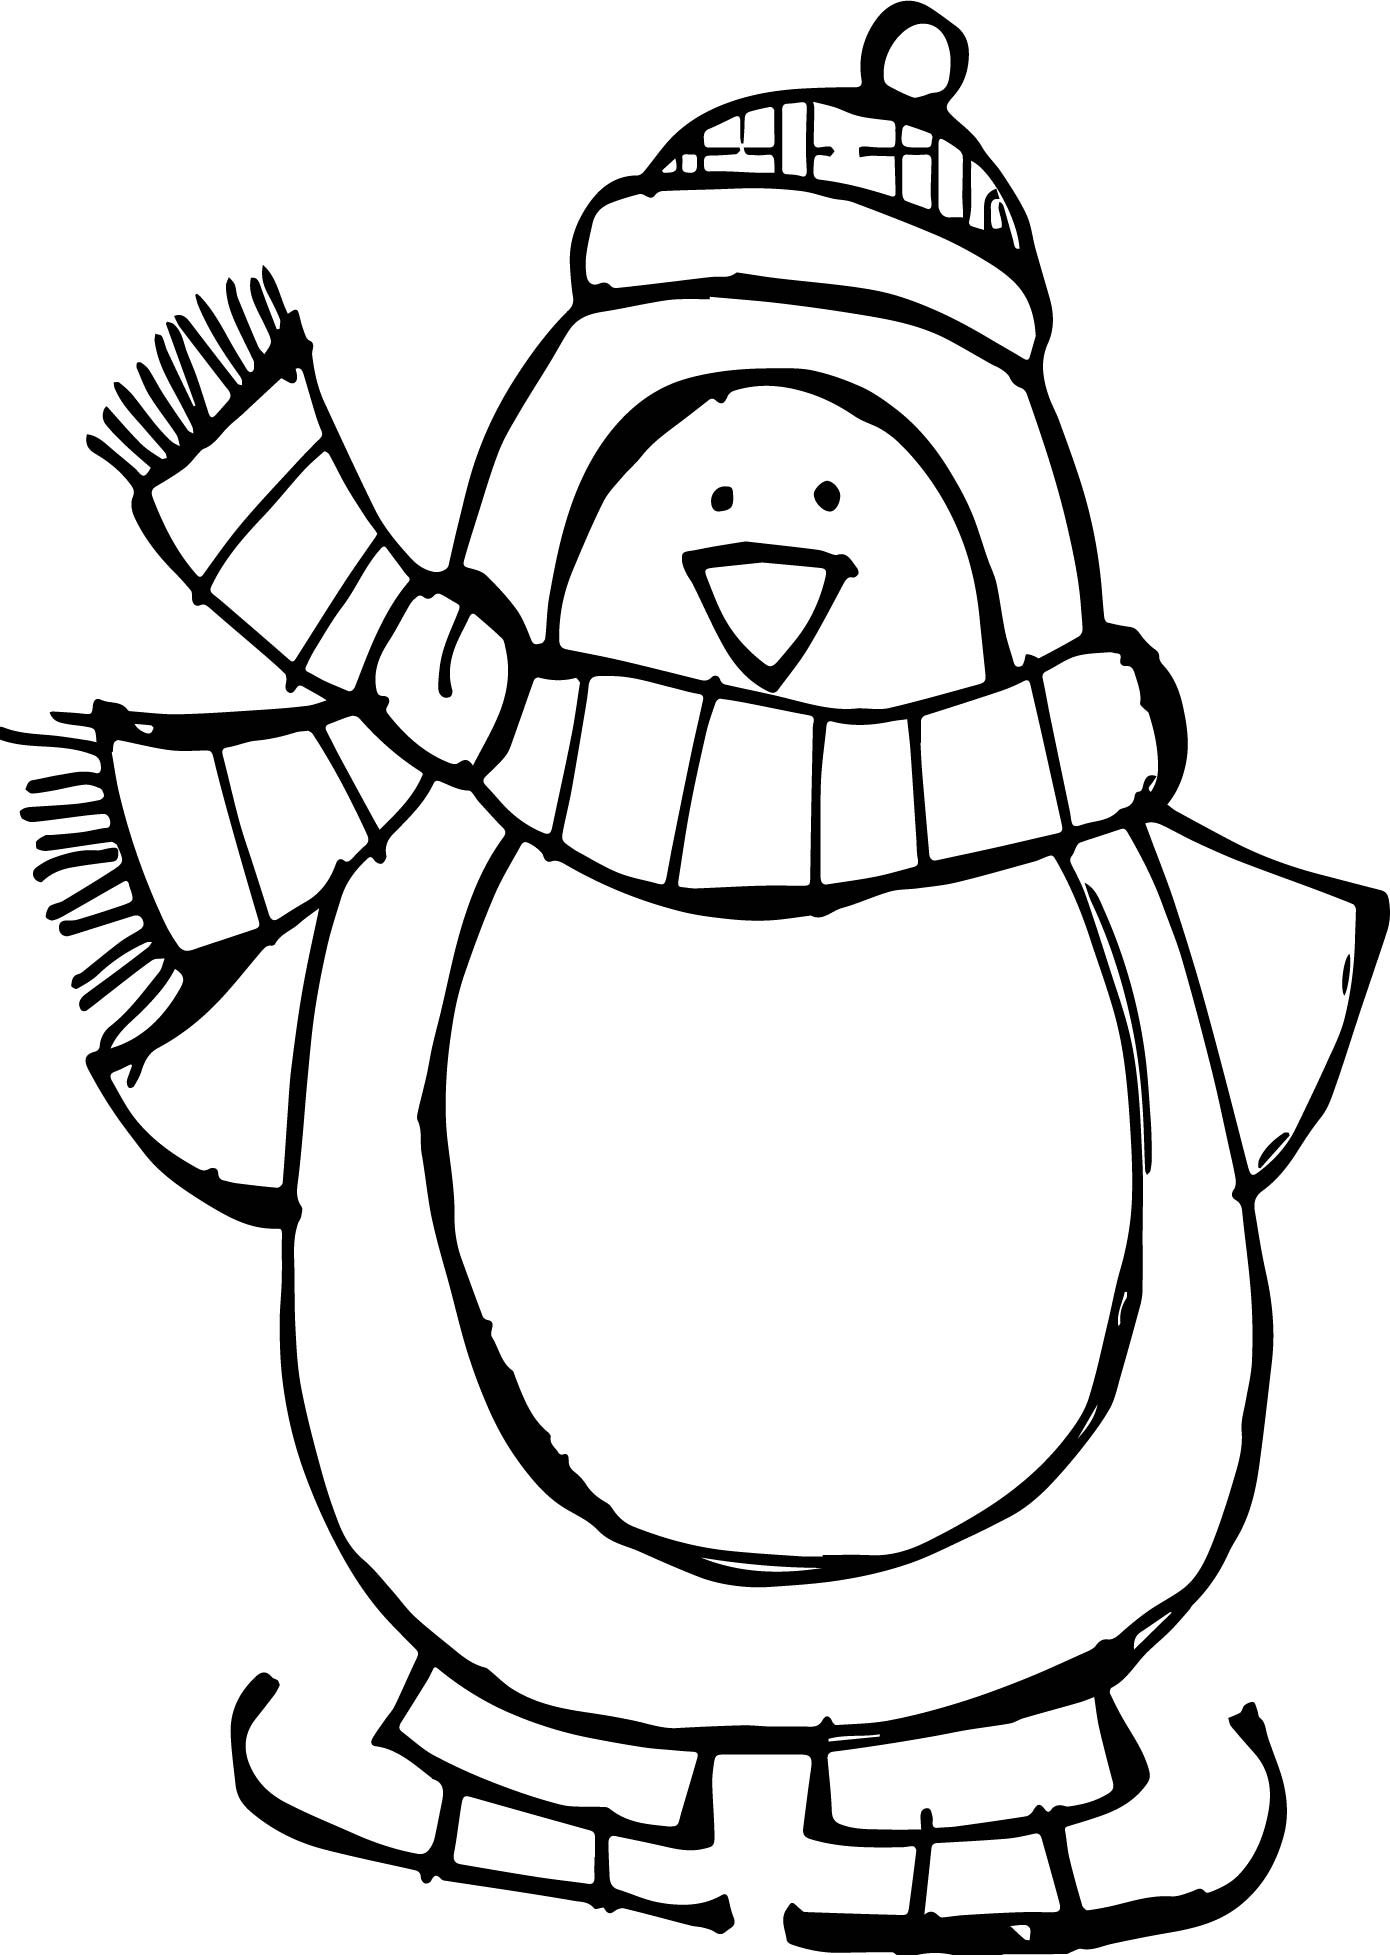 Baby Penguin Coloring Pages at GetColorings.com | Free printable